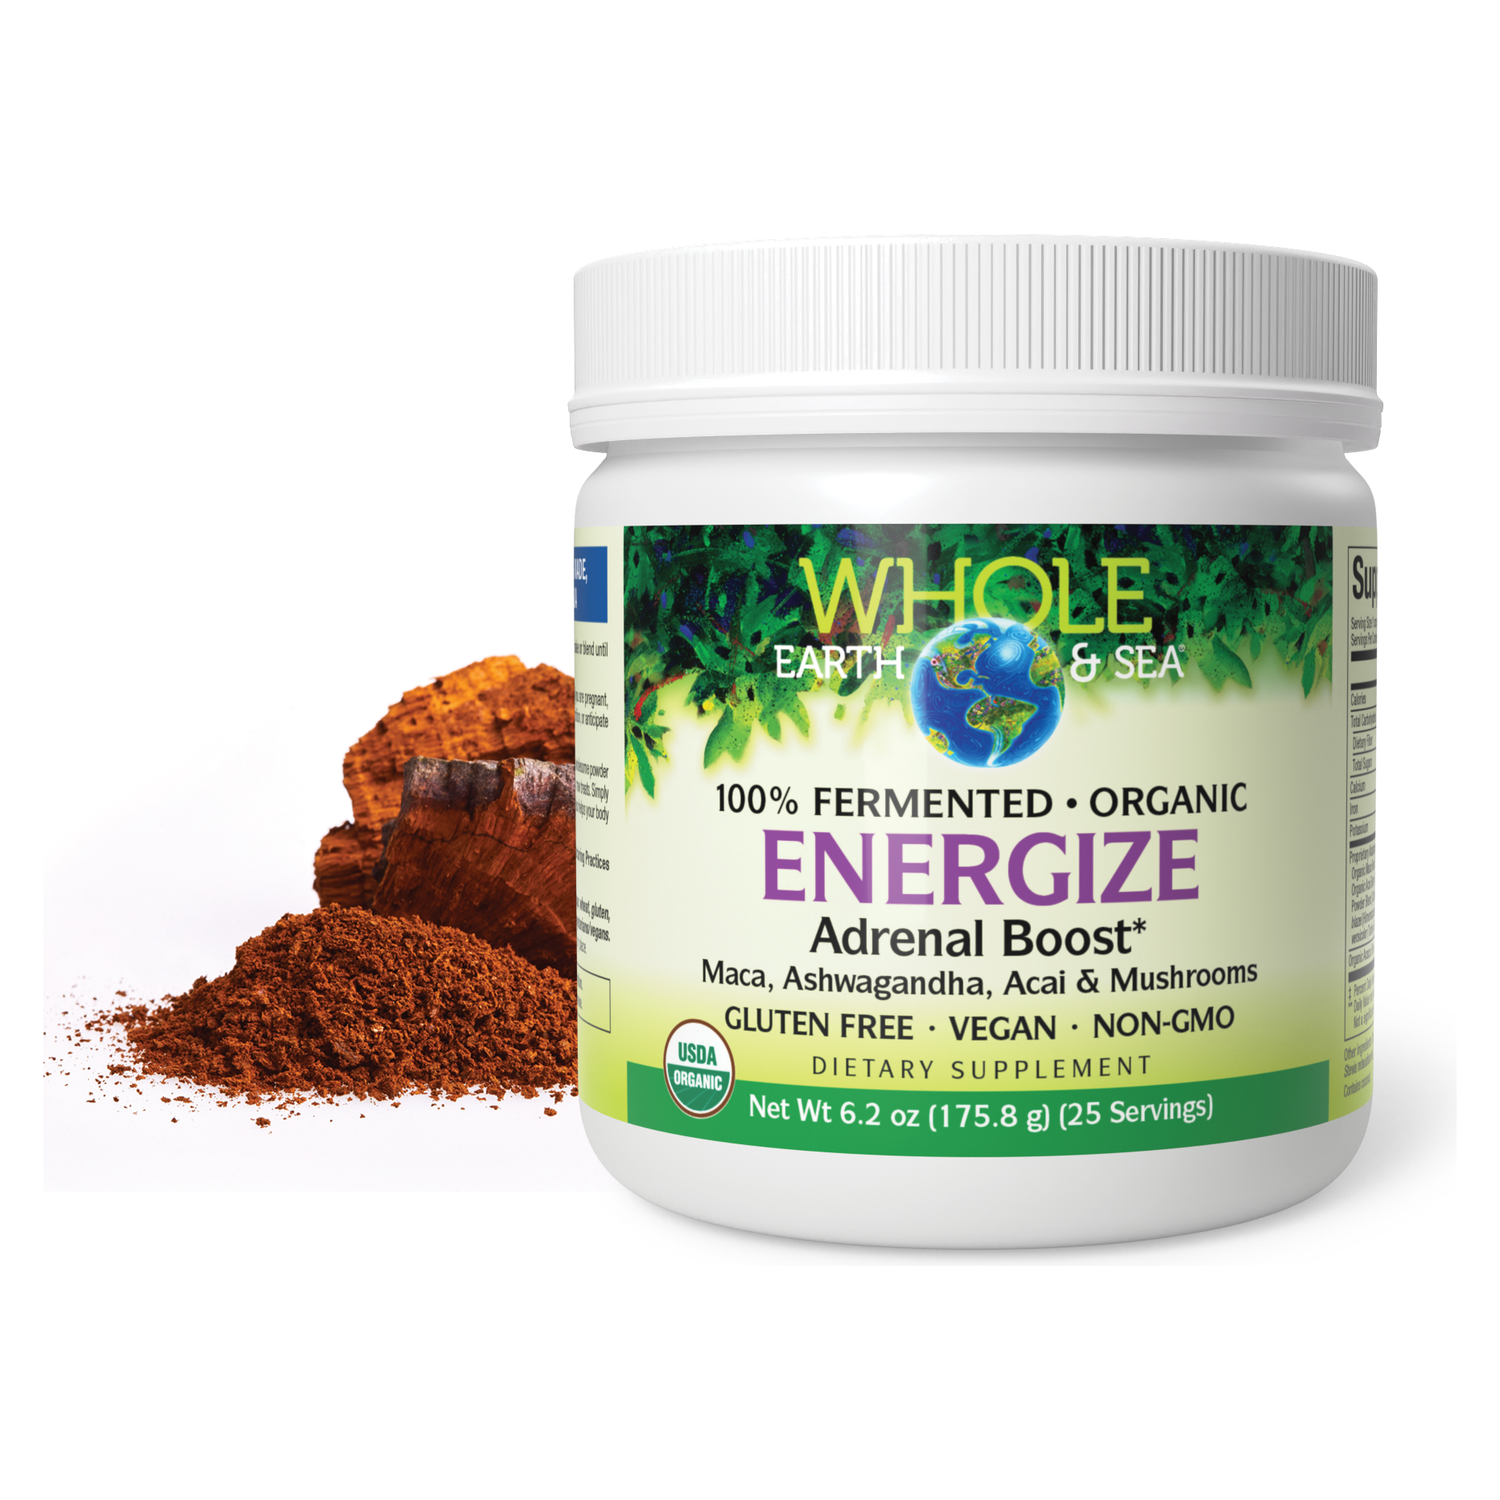 Energize Adrenal Boost for Whole Earth & Sea® |variant|hi-res|35554U